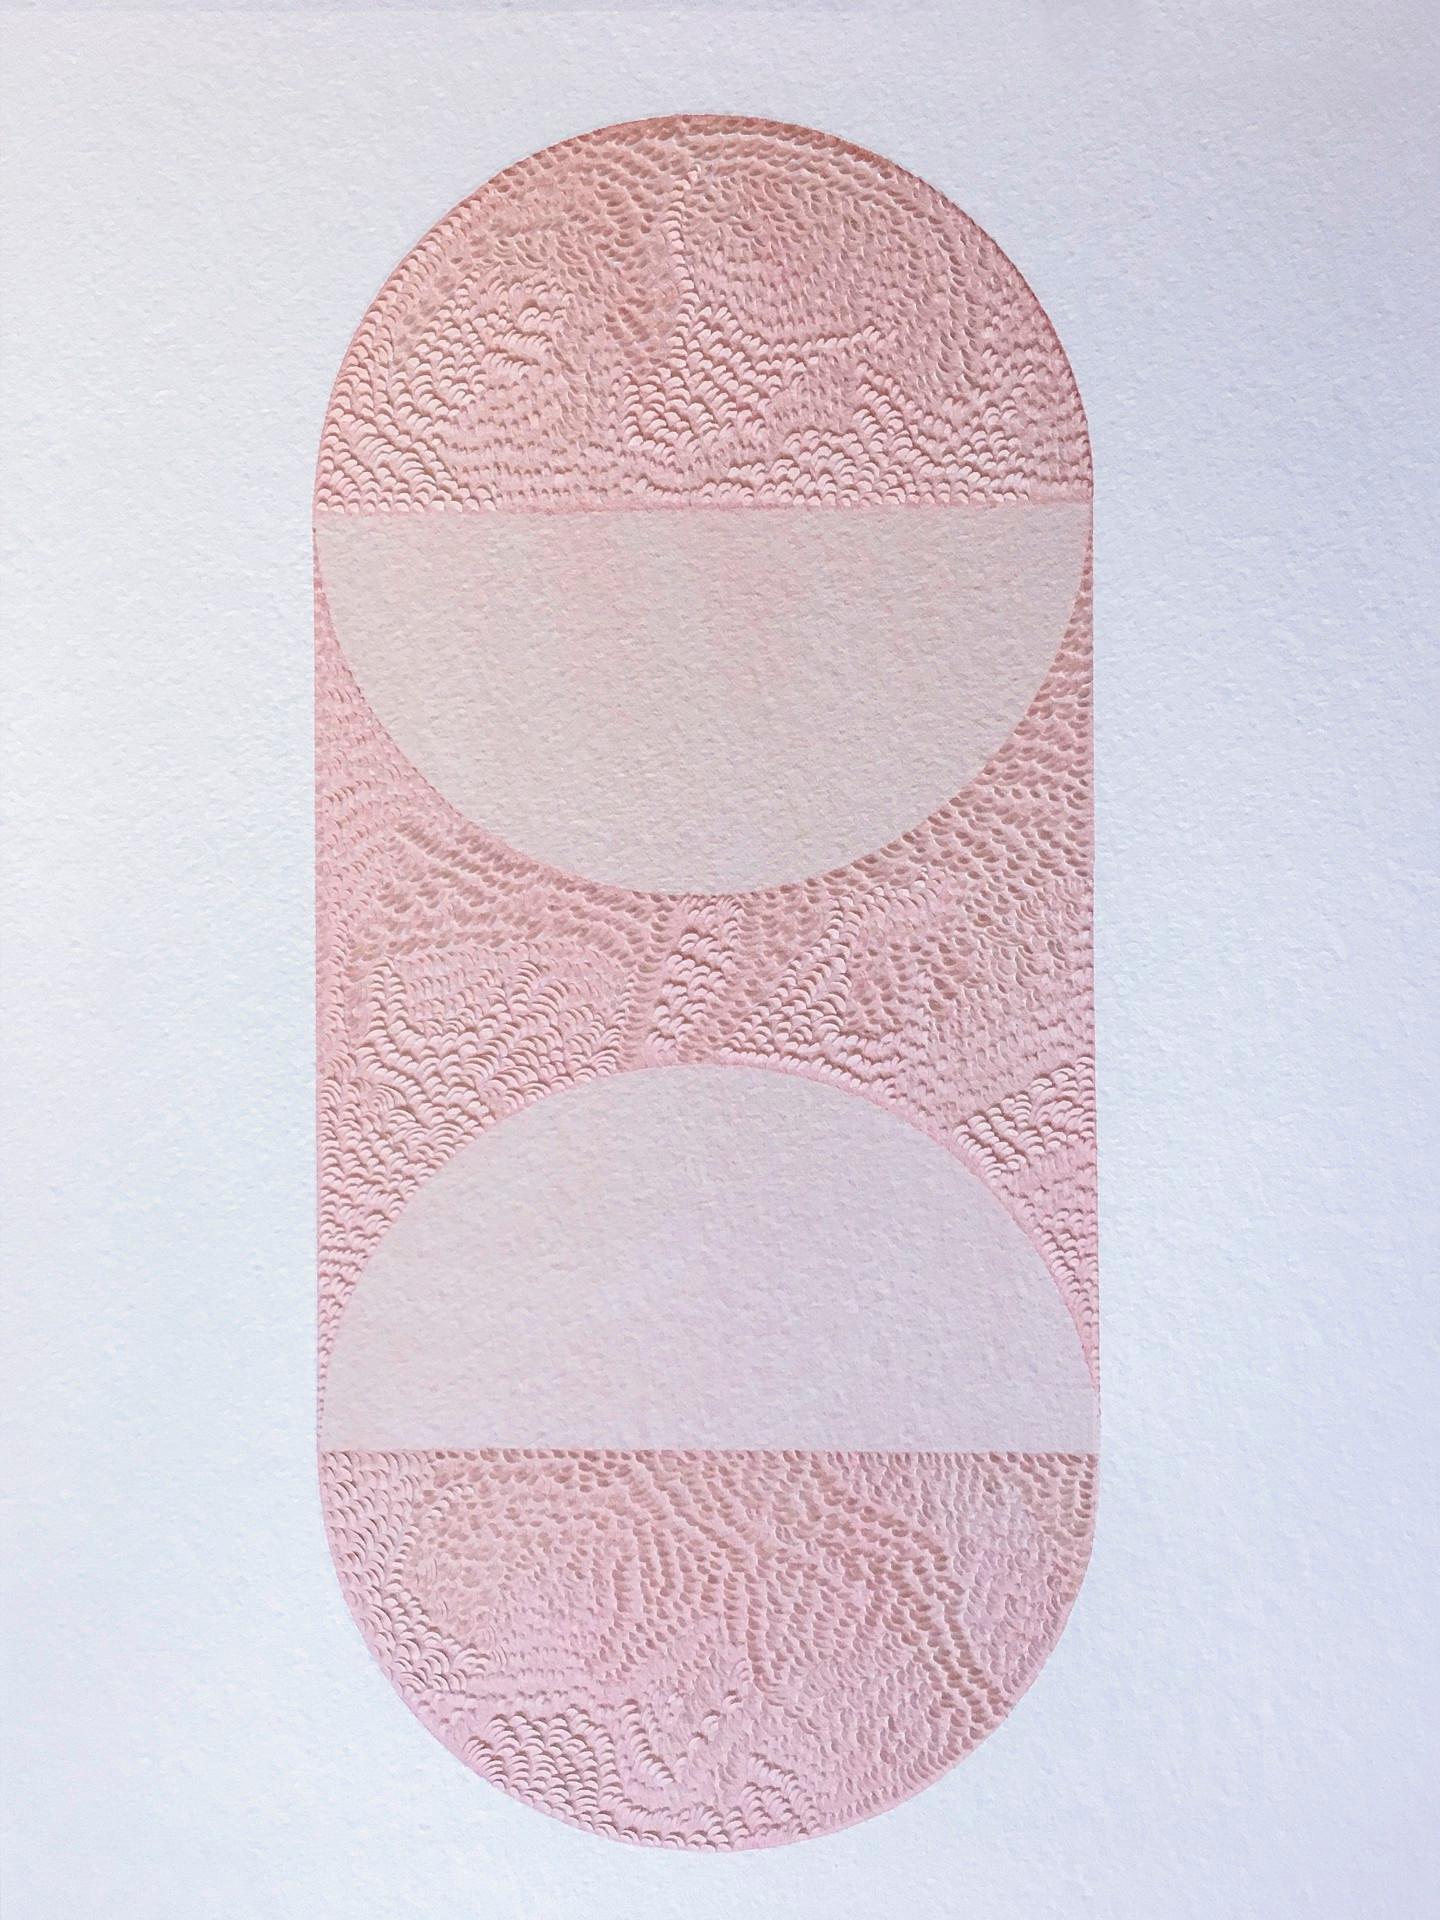 Knife Drawing XXIV - Manipulated Textured Paper with Stunning Detail (Pink)